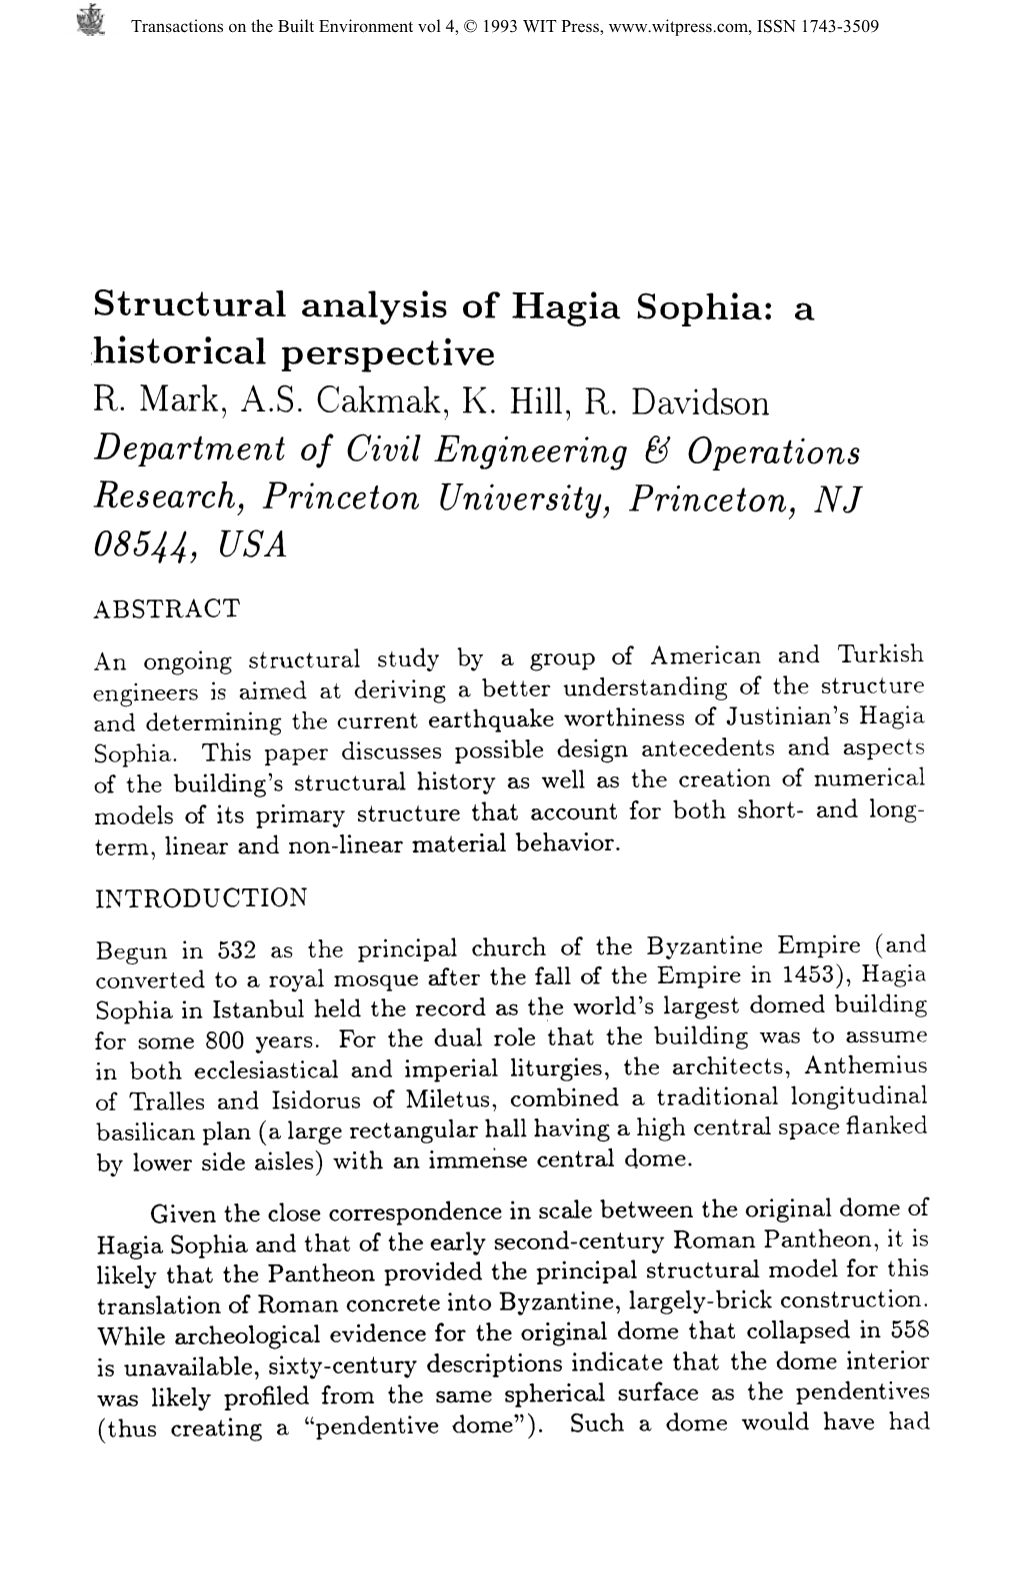 Structural Analysis of Hagia Sophia: a Historical Perspective